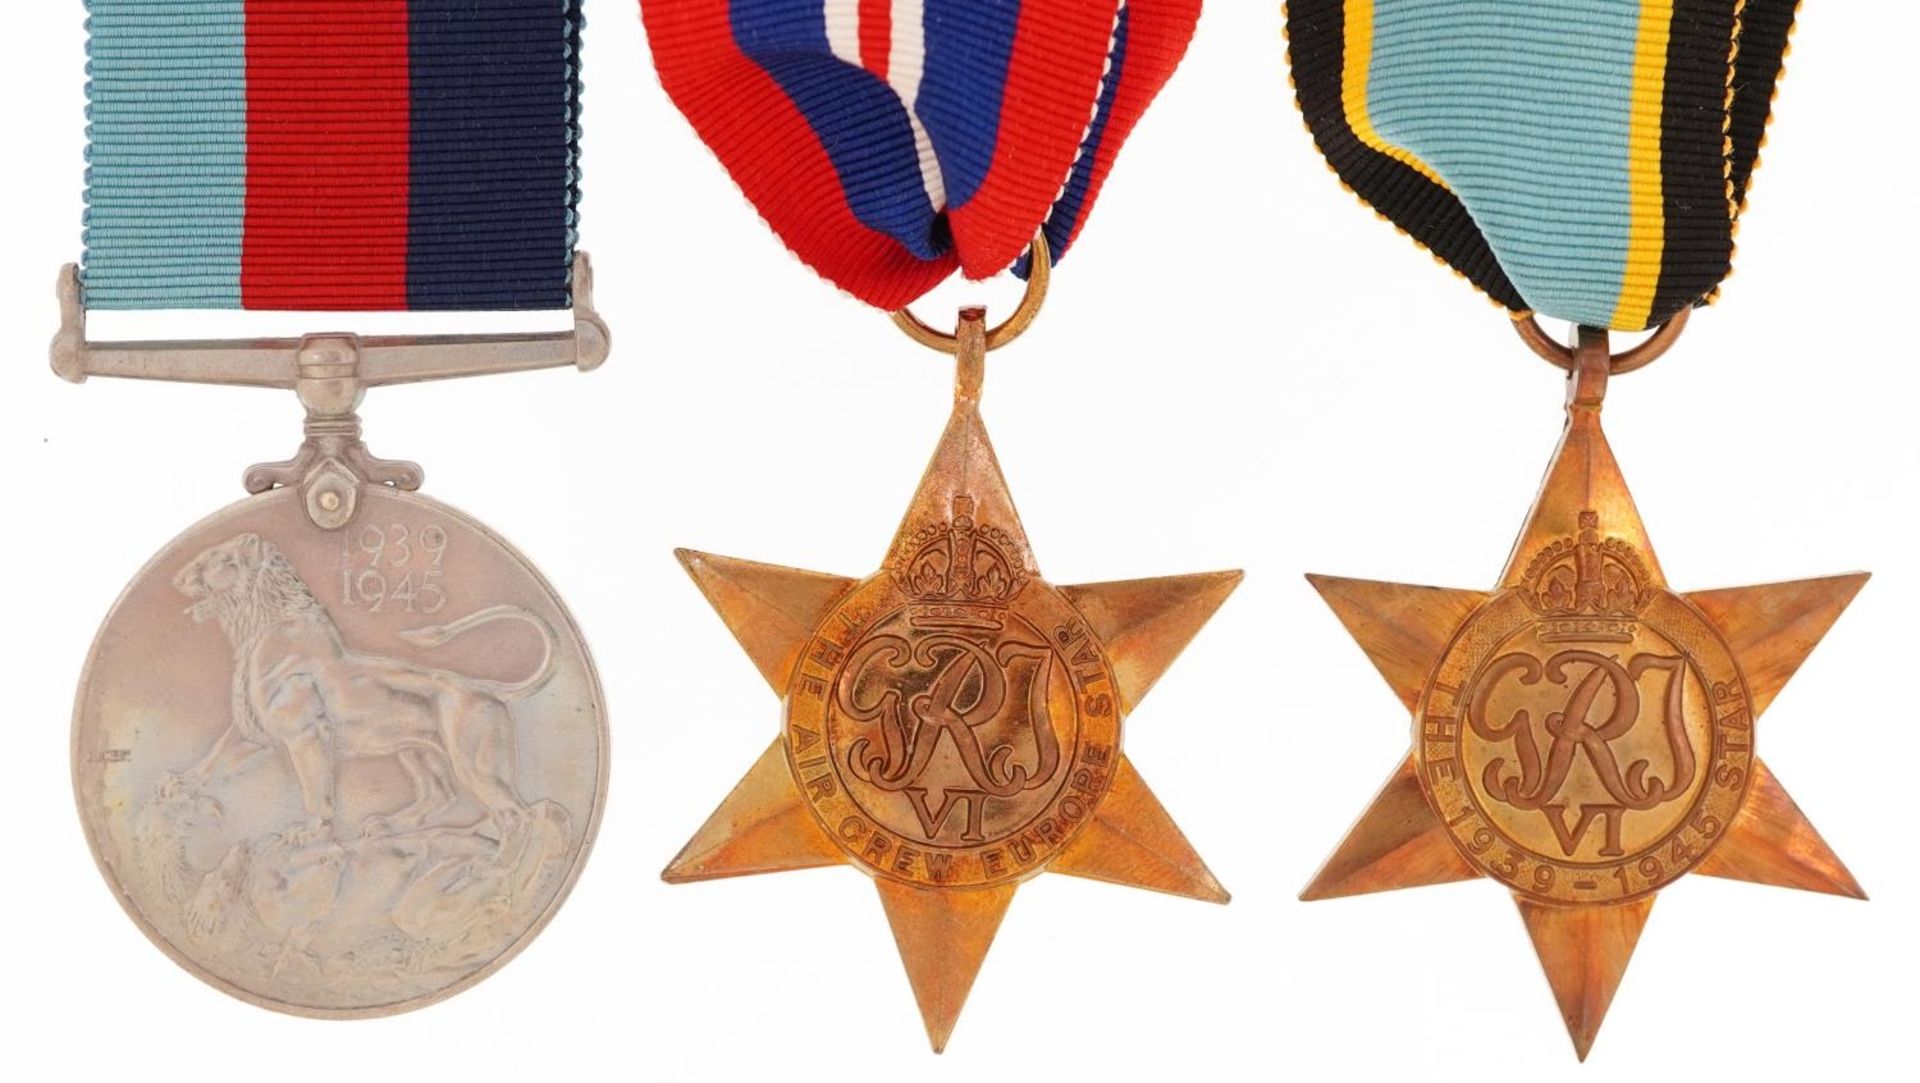 Three British military World War II medals with box of issue including Air Crew Europe star, the box - Image 2 of 3